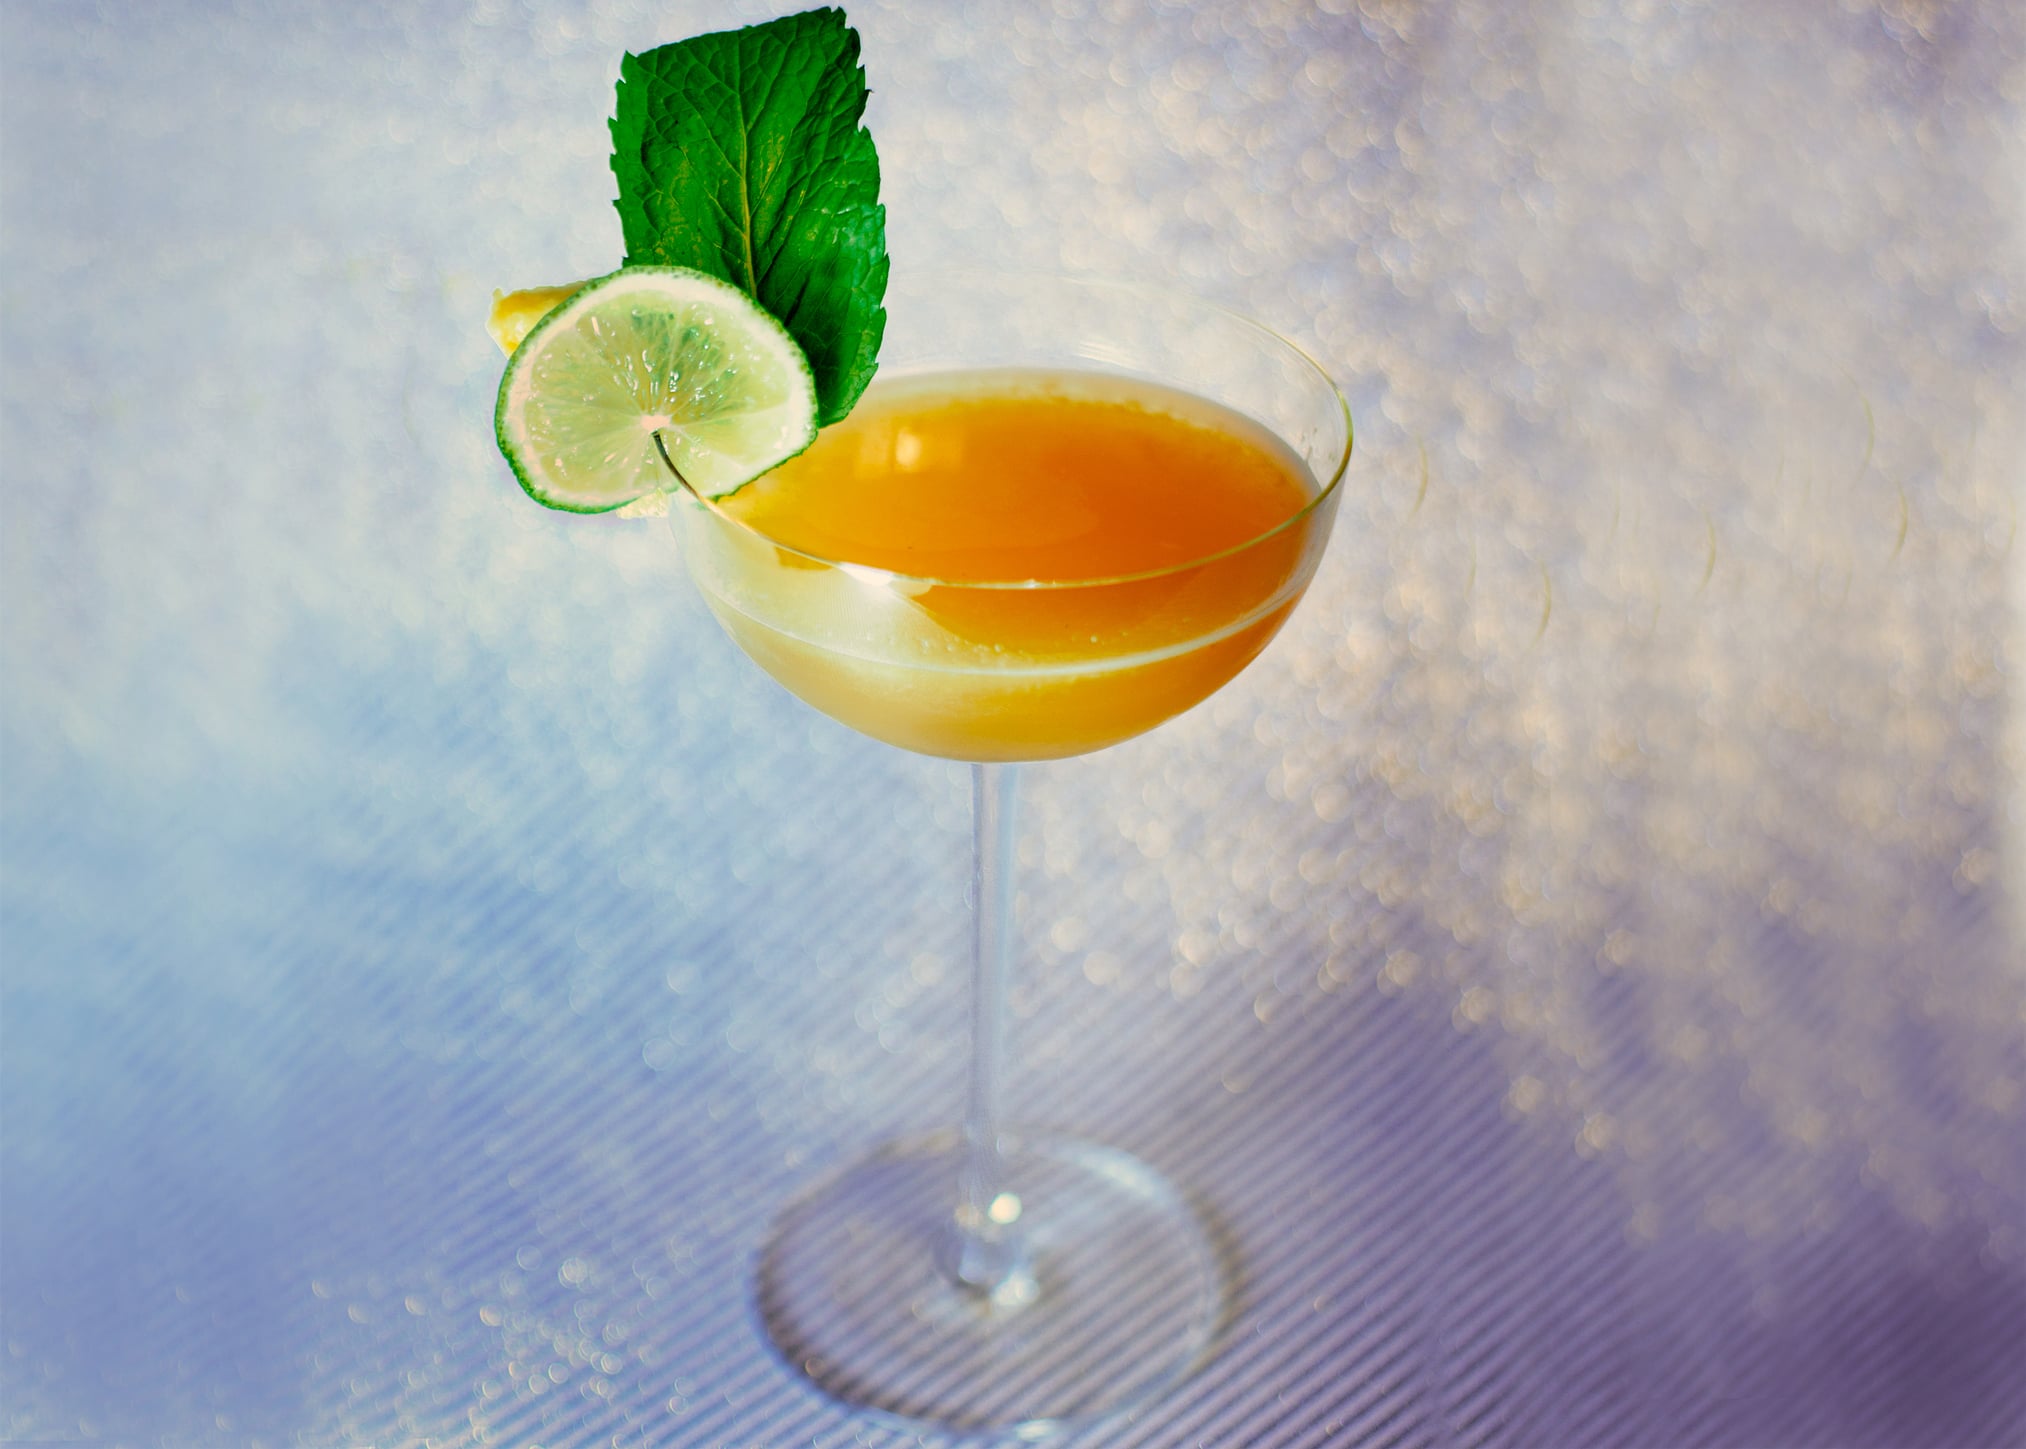 Hollywood-Inspired Cocktail ingredients